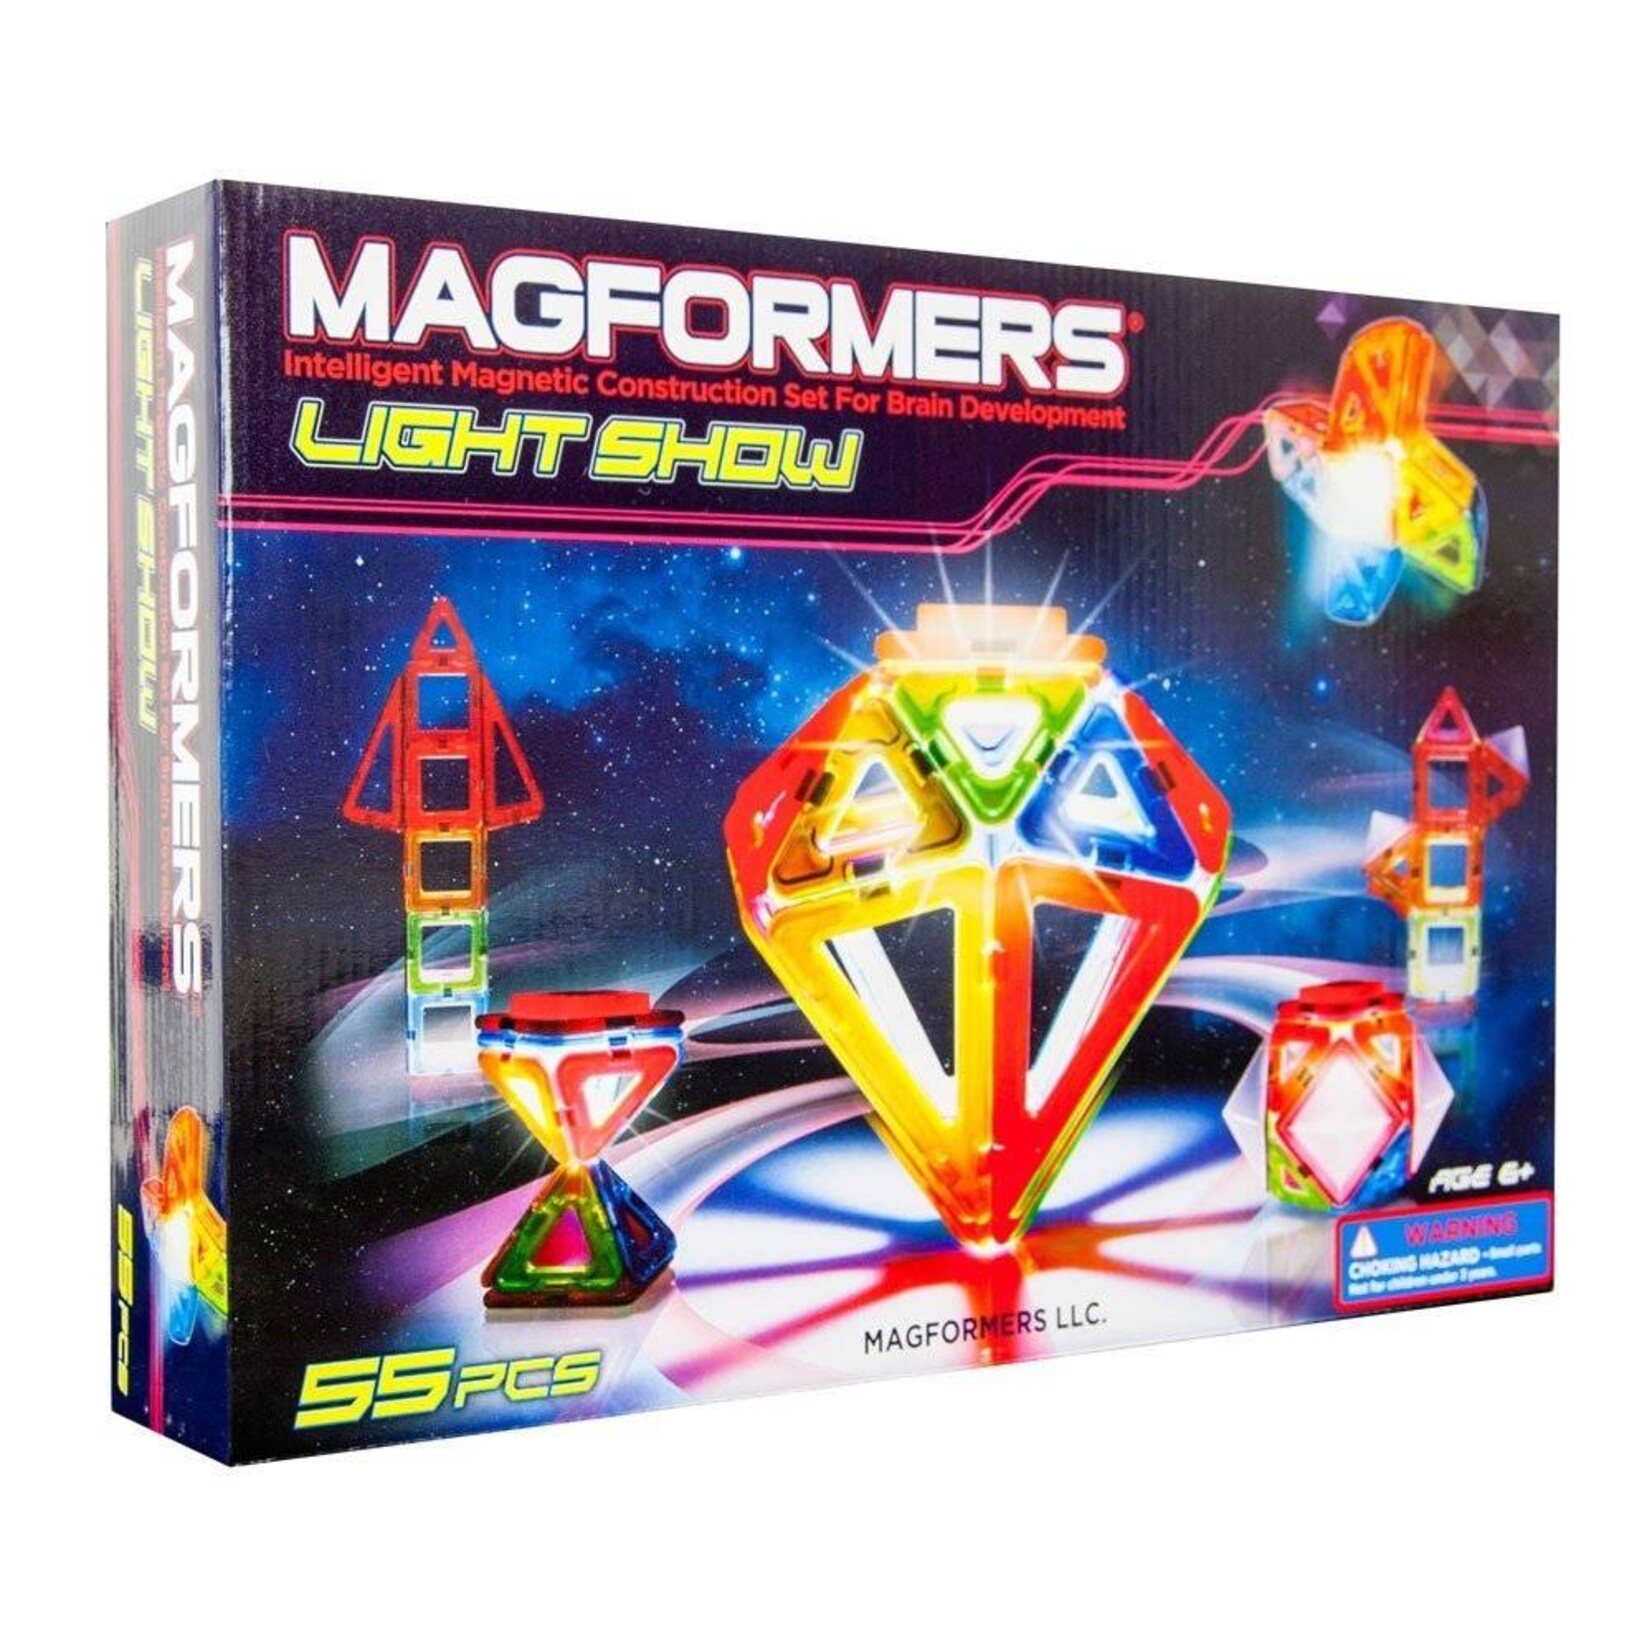 Magformers Lighted Set (55pc)